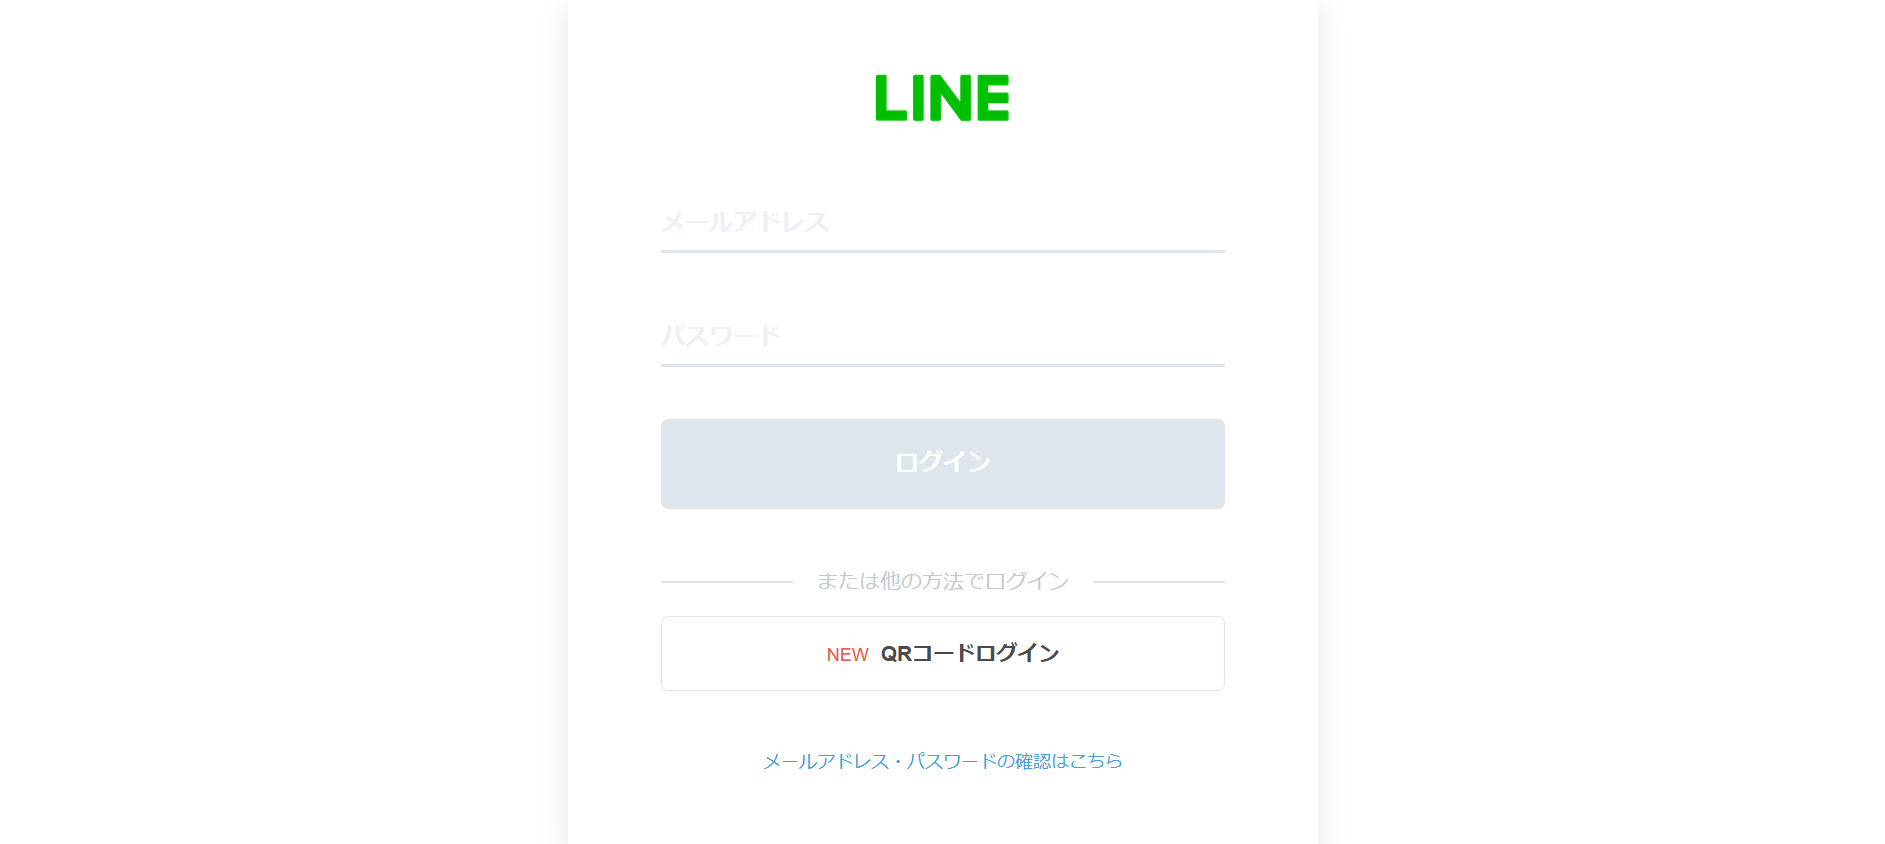 LINEDevelopersログイン.png